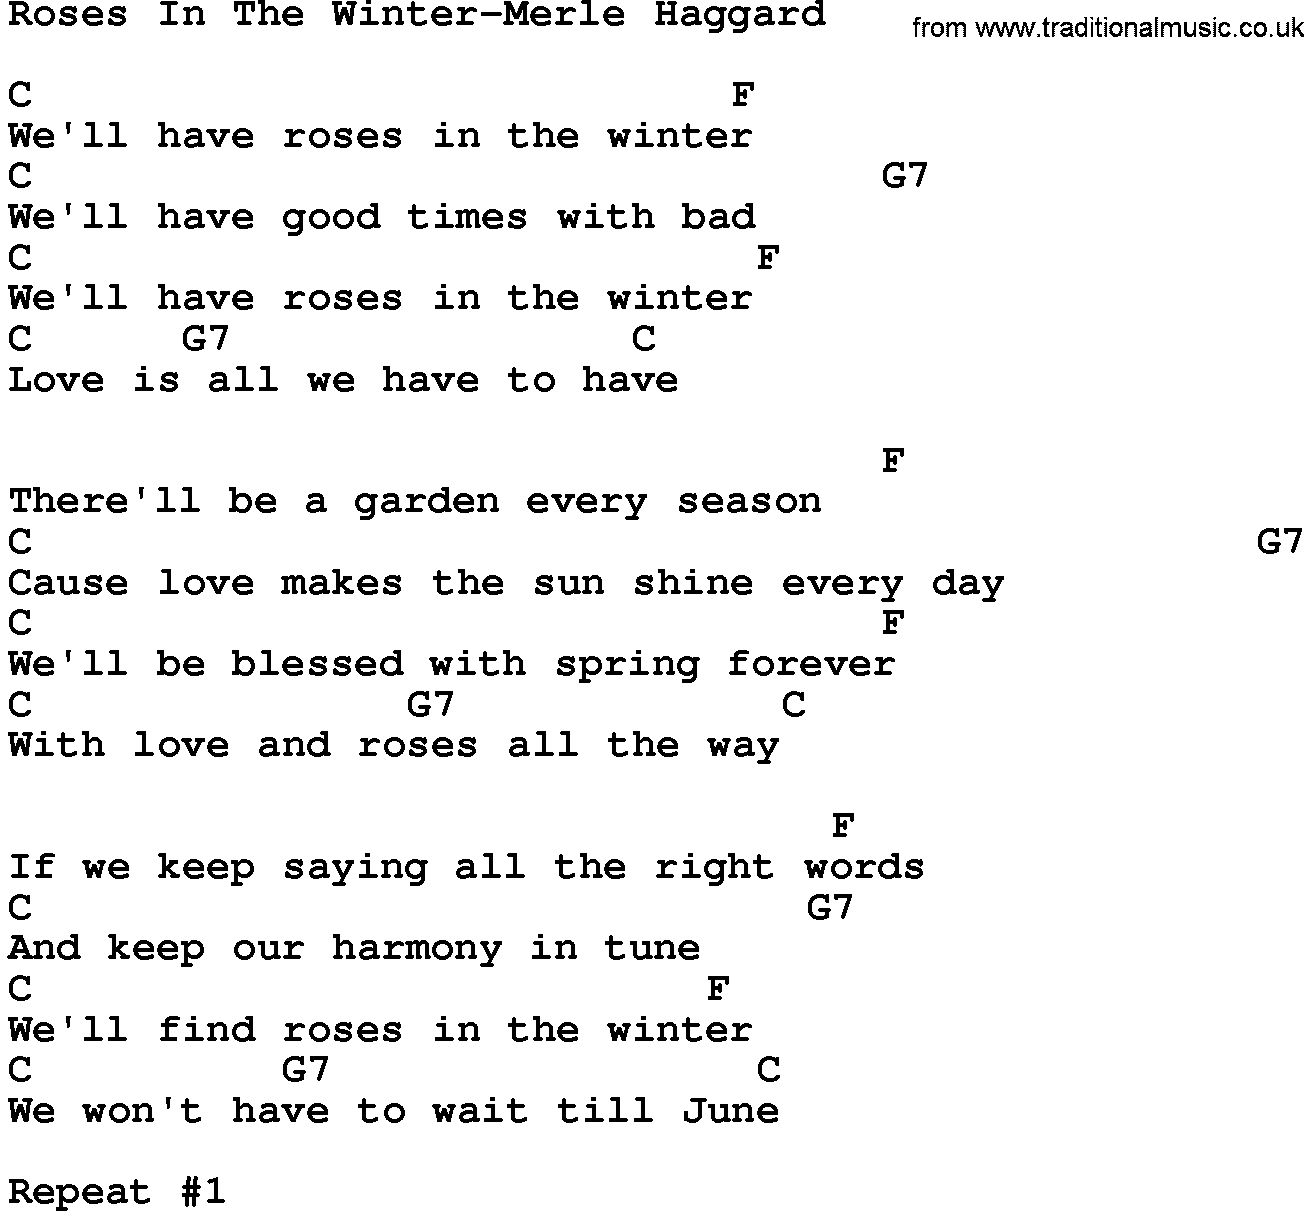 Country music song: Roses In The Winter-Merle Haggard lyrics and chords